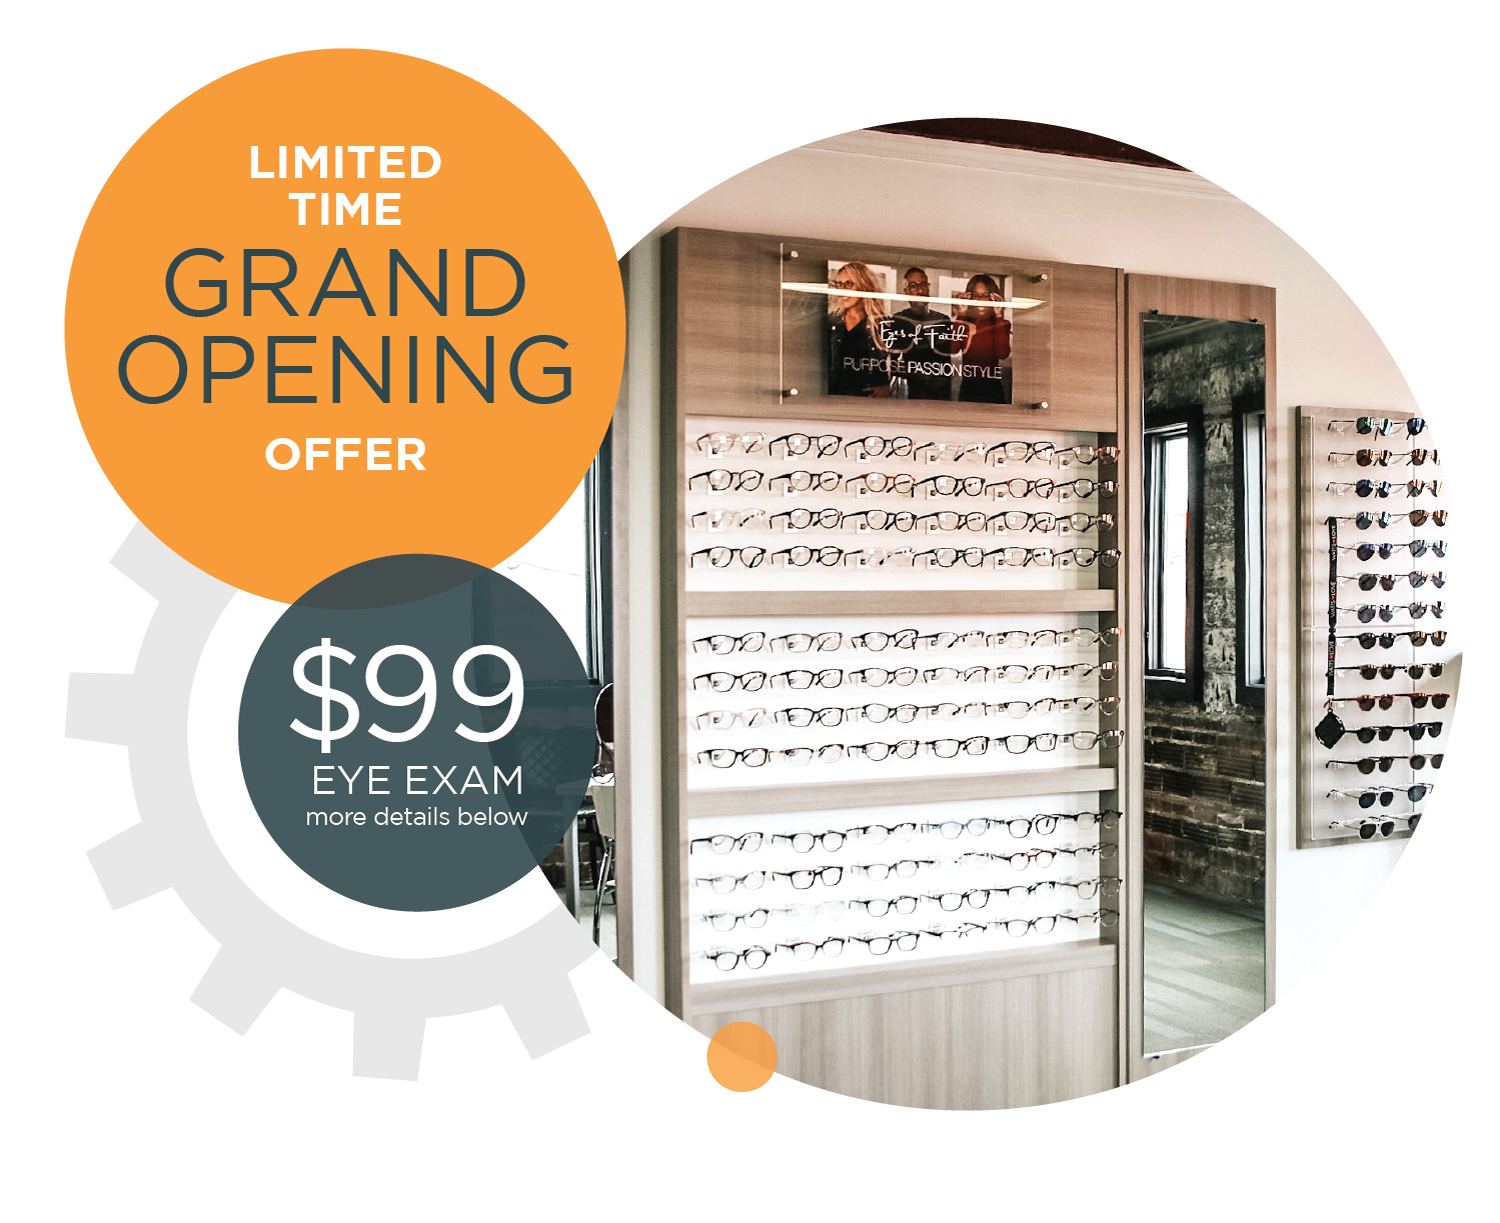 Limited Time Grand Opening Offer - $99 Eye Exam